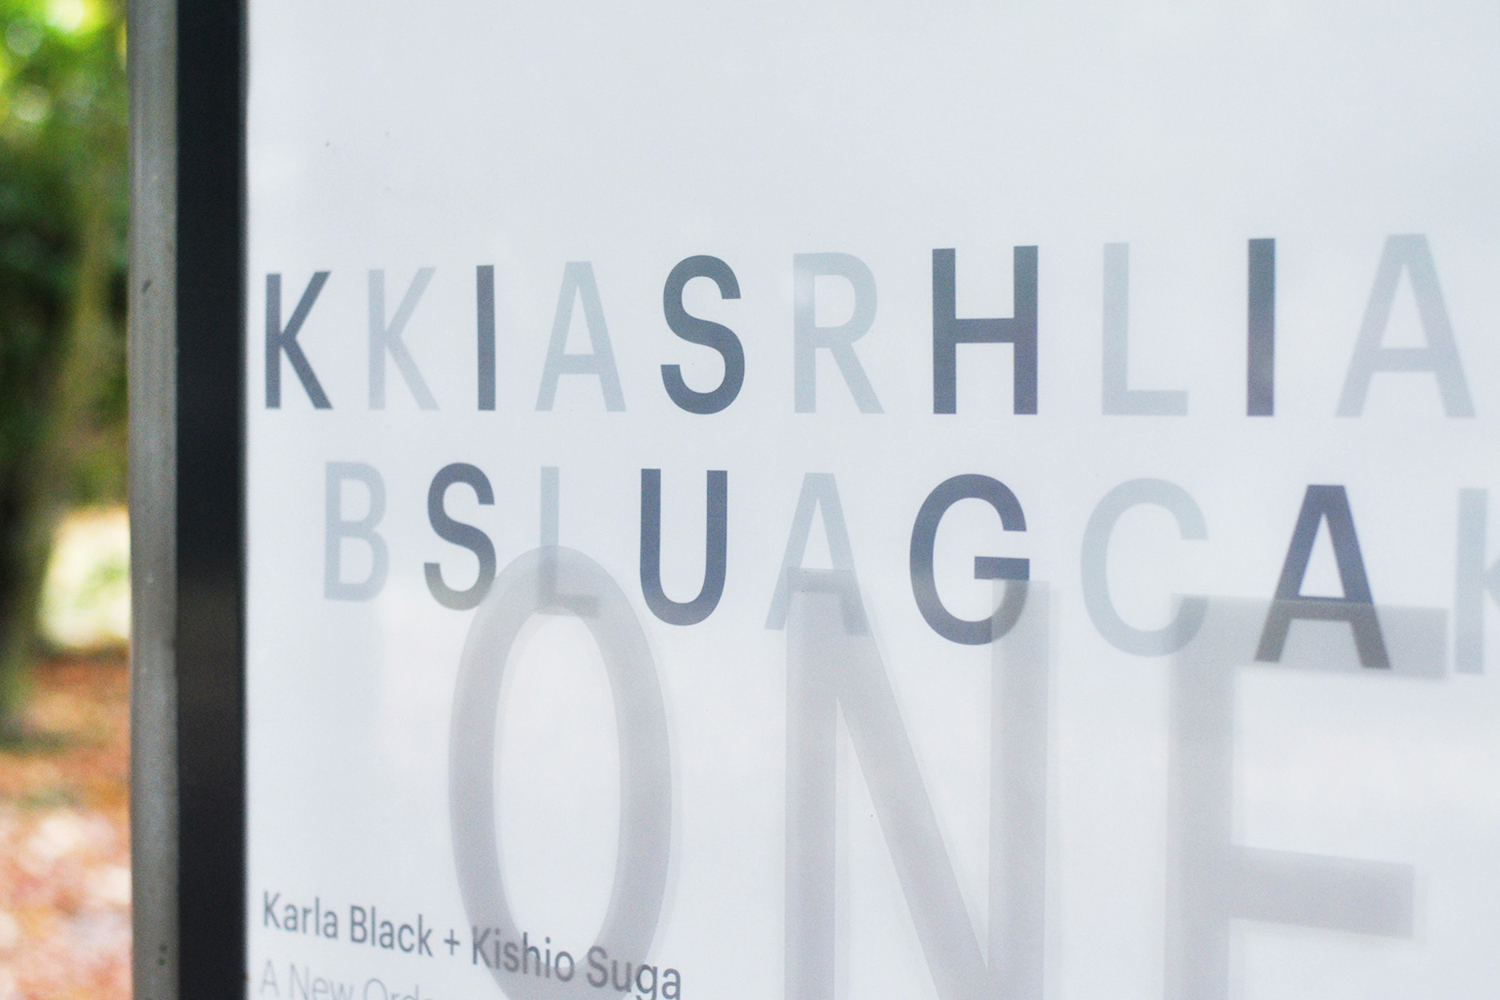 Visual identity and poster for the exhibition Karla Black + Kishio Suga: A New Order at the Scottish National Gallery of Modern Art designed by O Street, UK